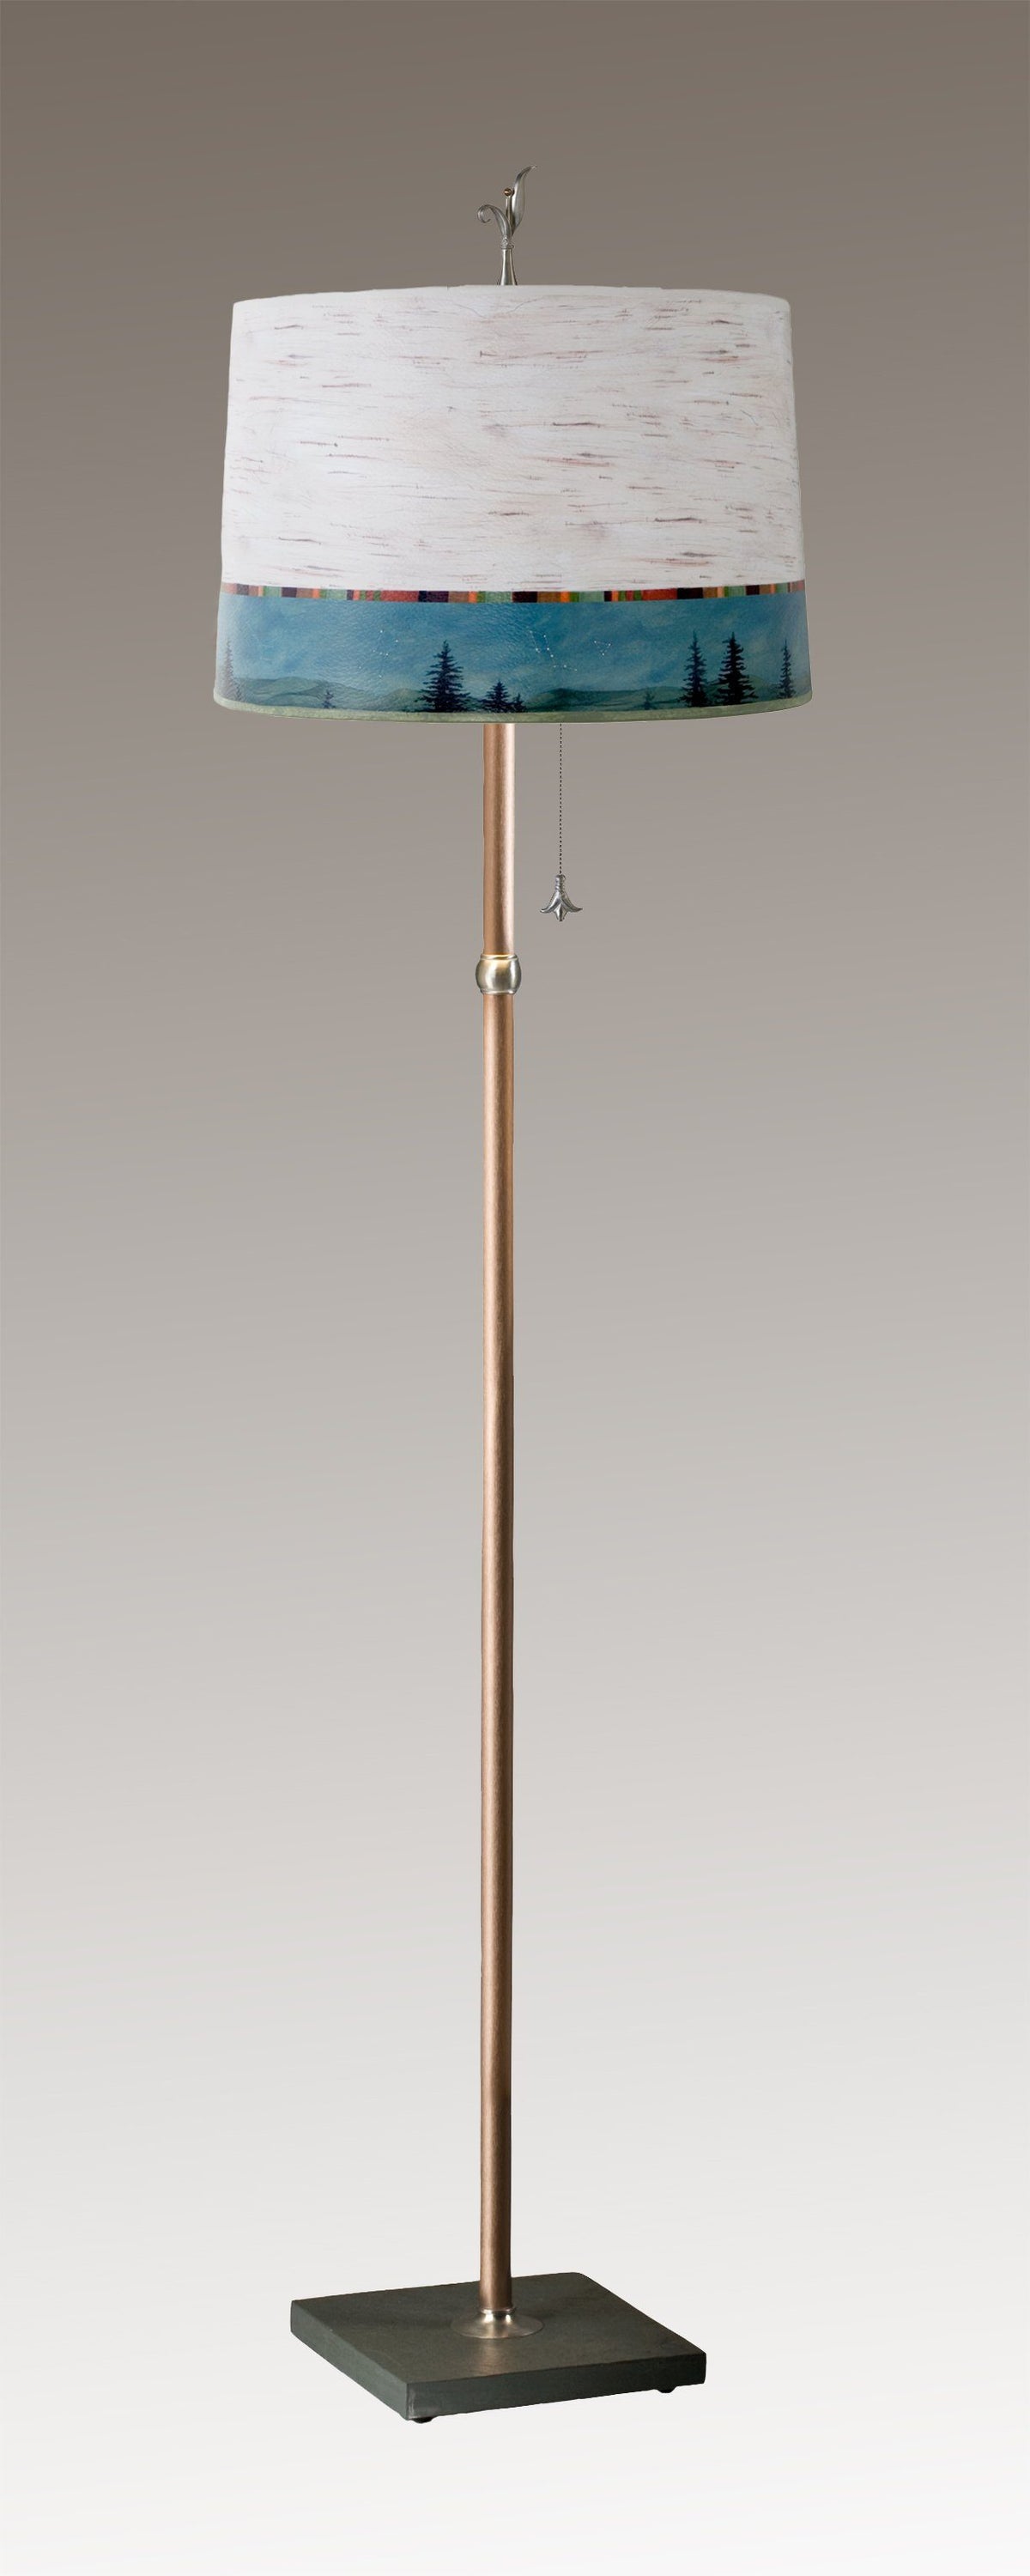 Copper Floor Lamp with Large Drum Shade in Birch Midnight